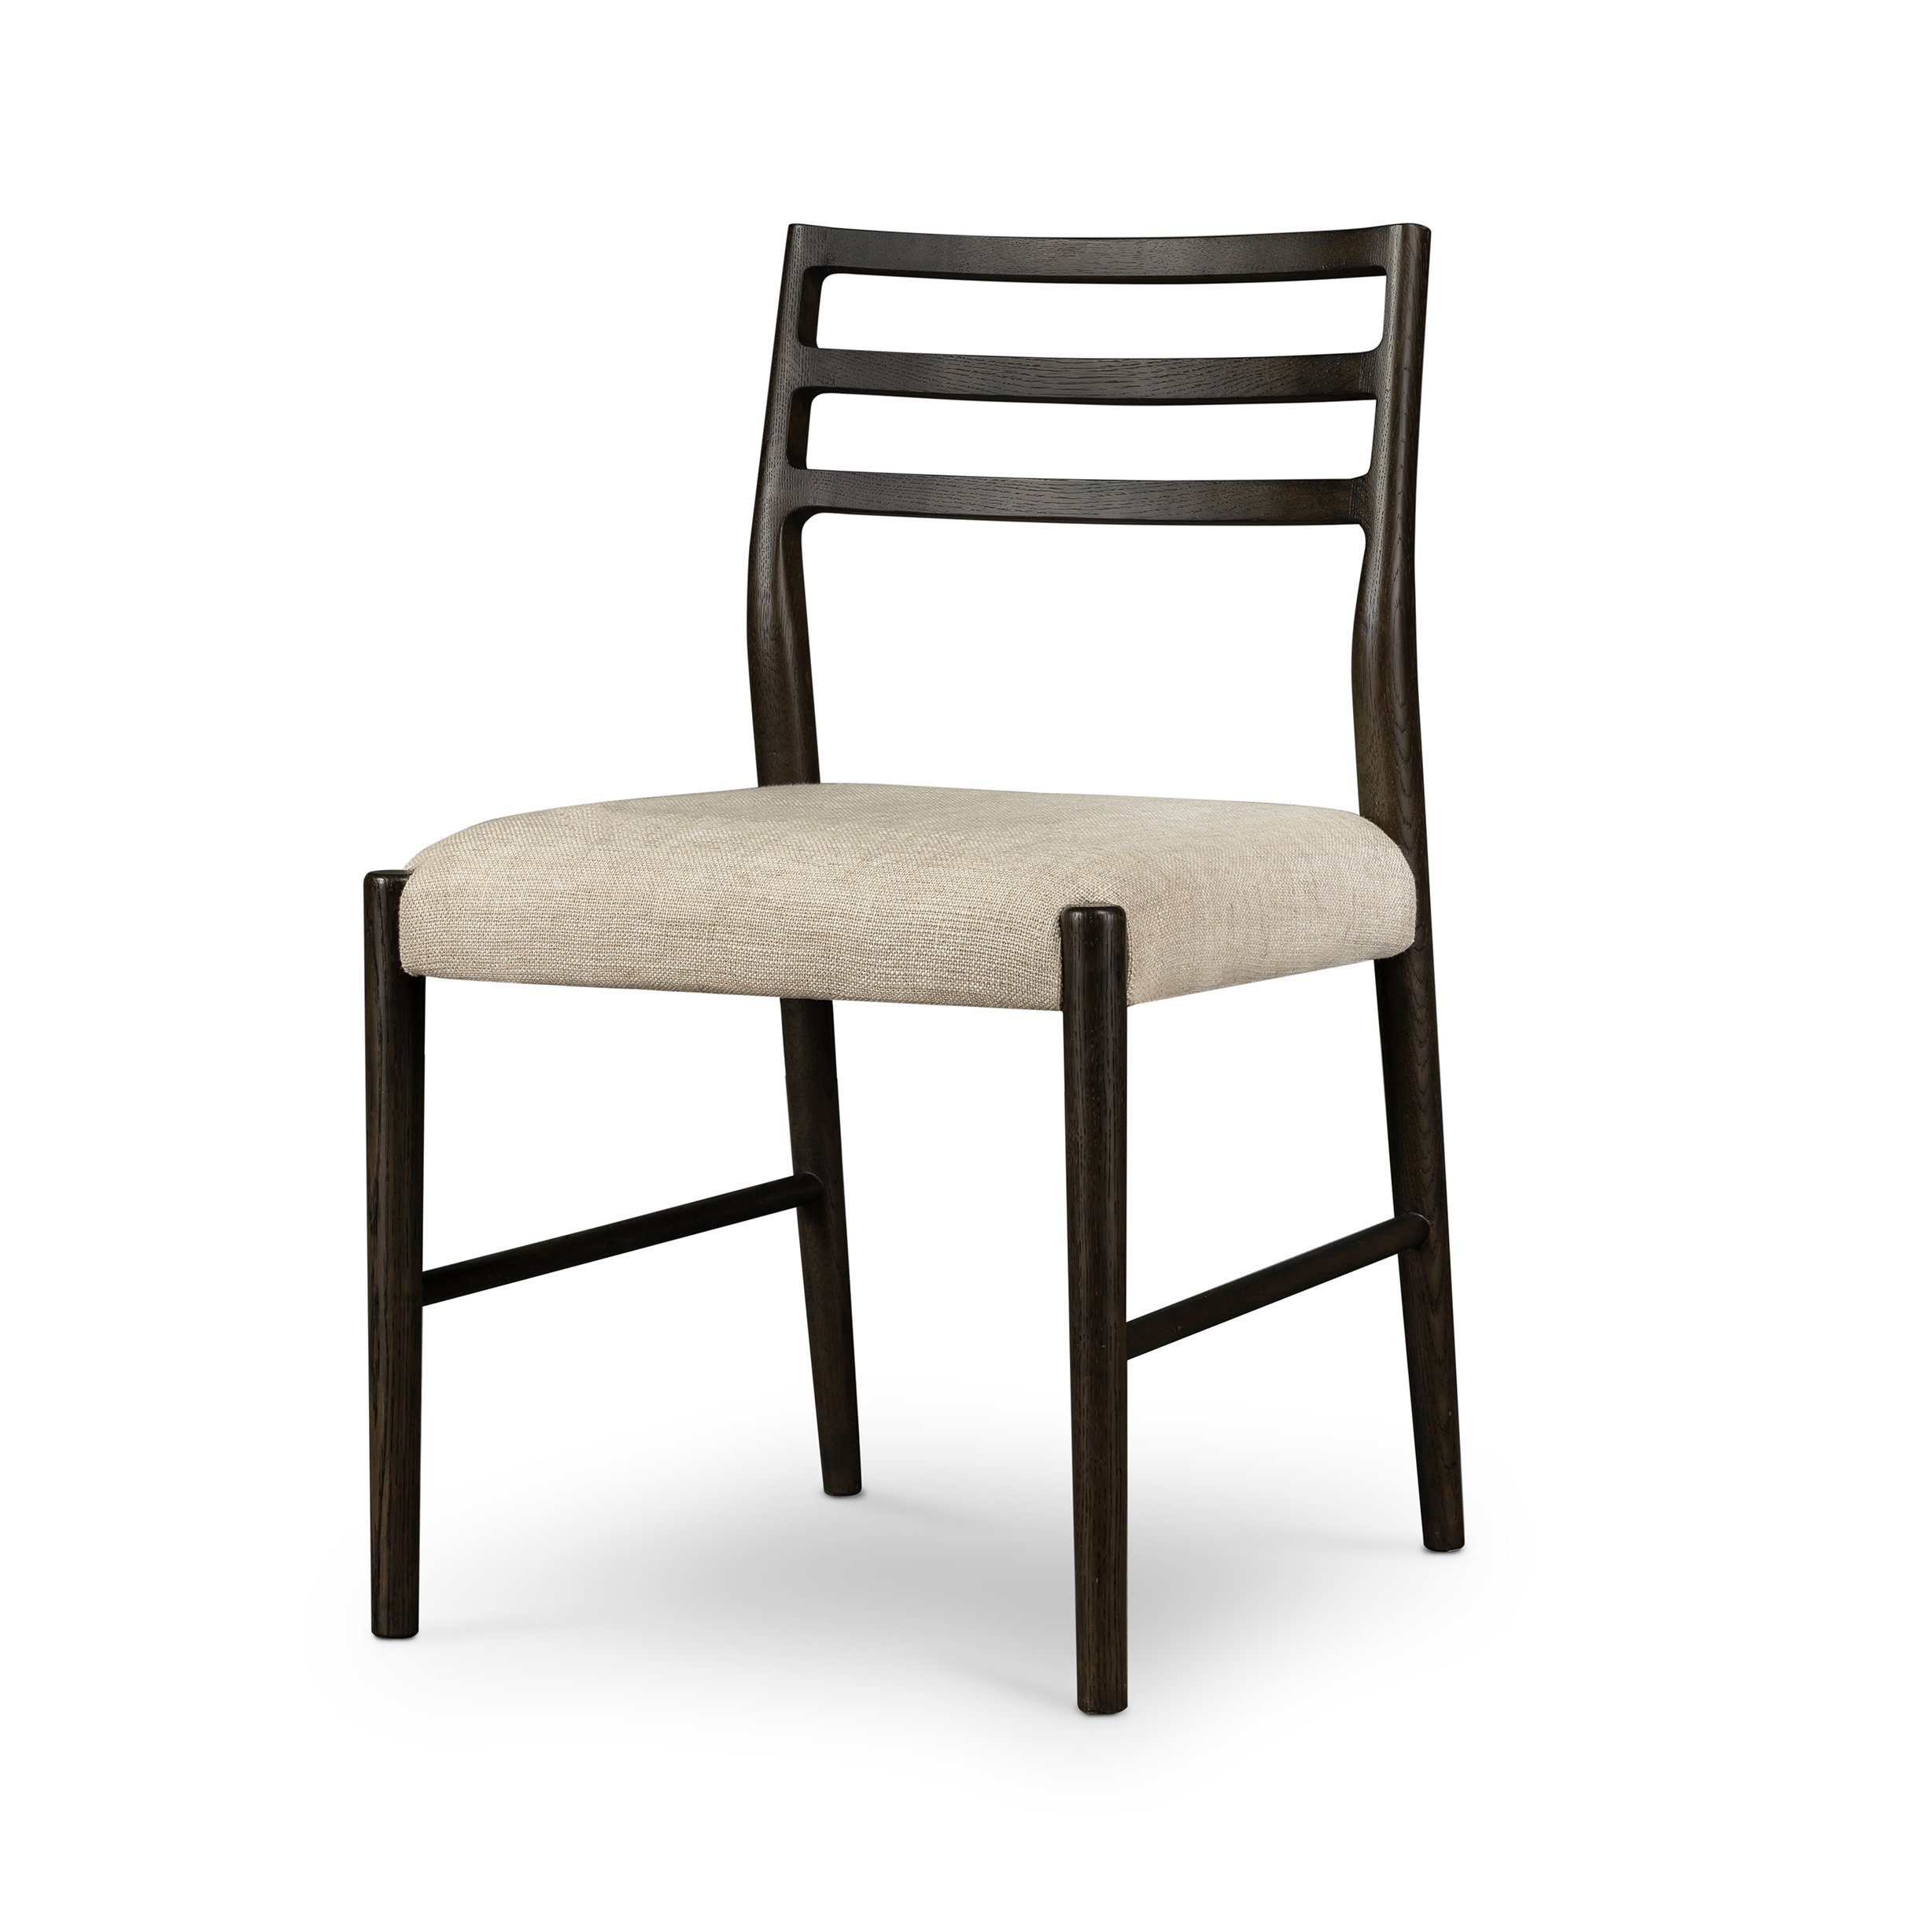 Cade Dining Chair $399.00